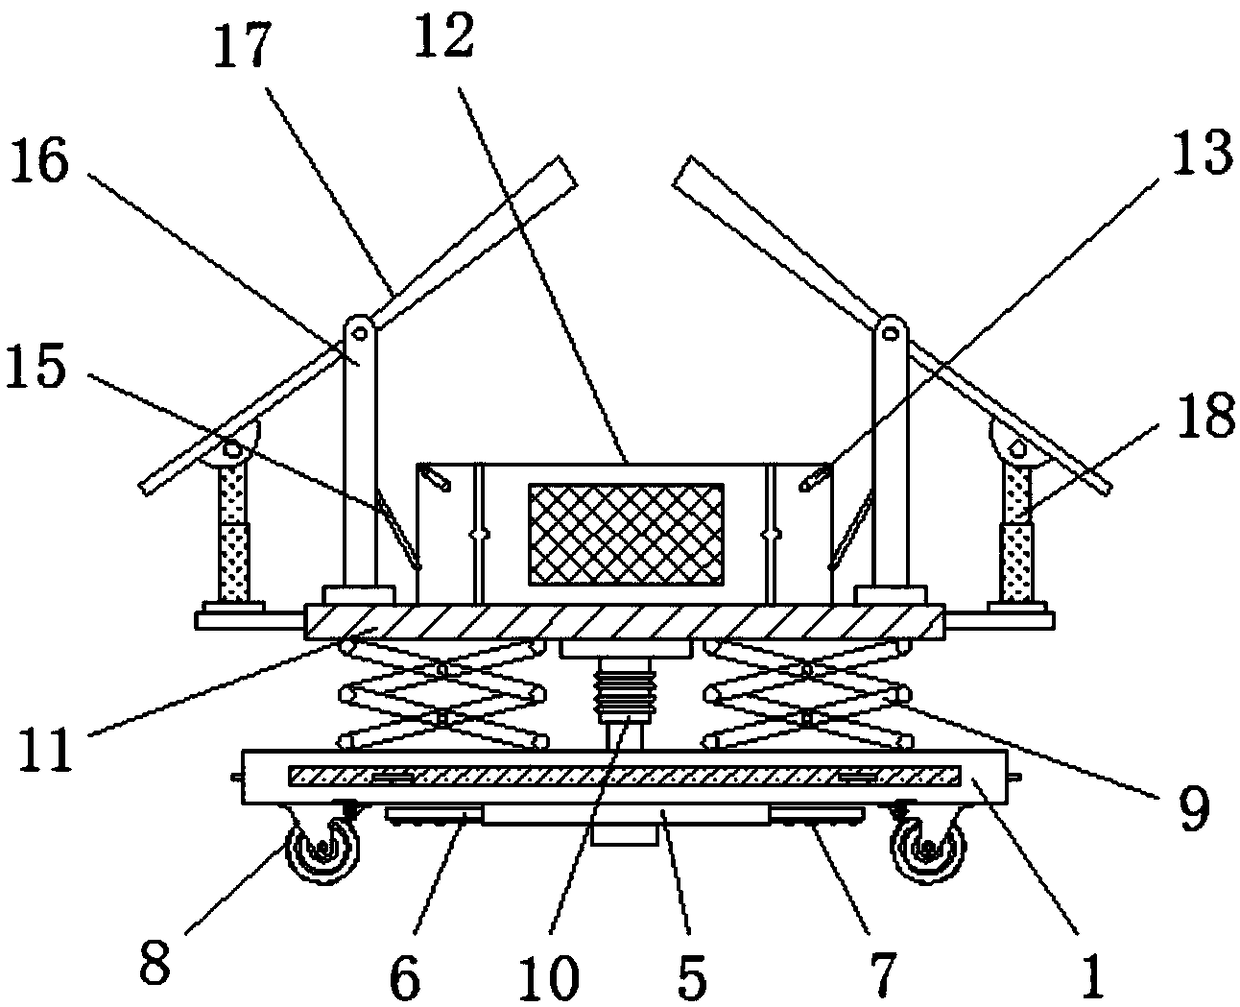 Height-climbing operation vehicle with protection device